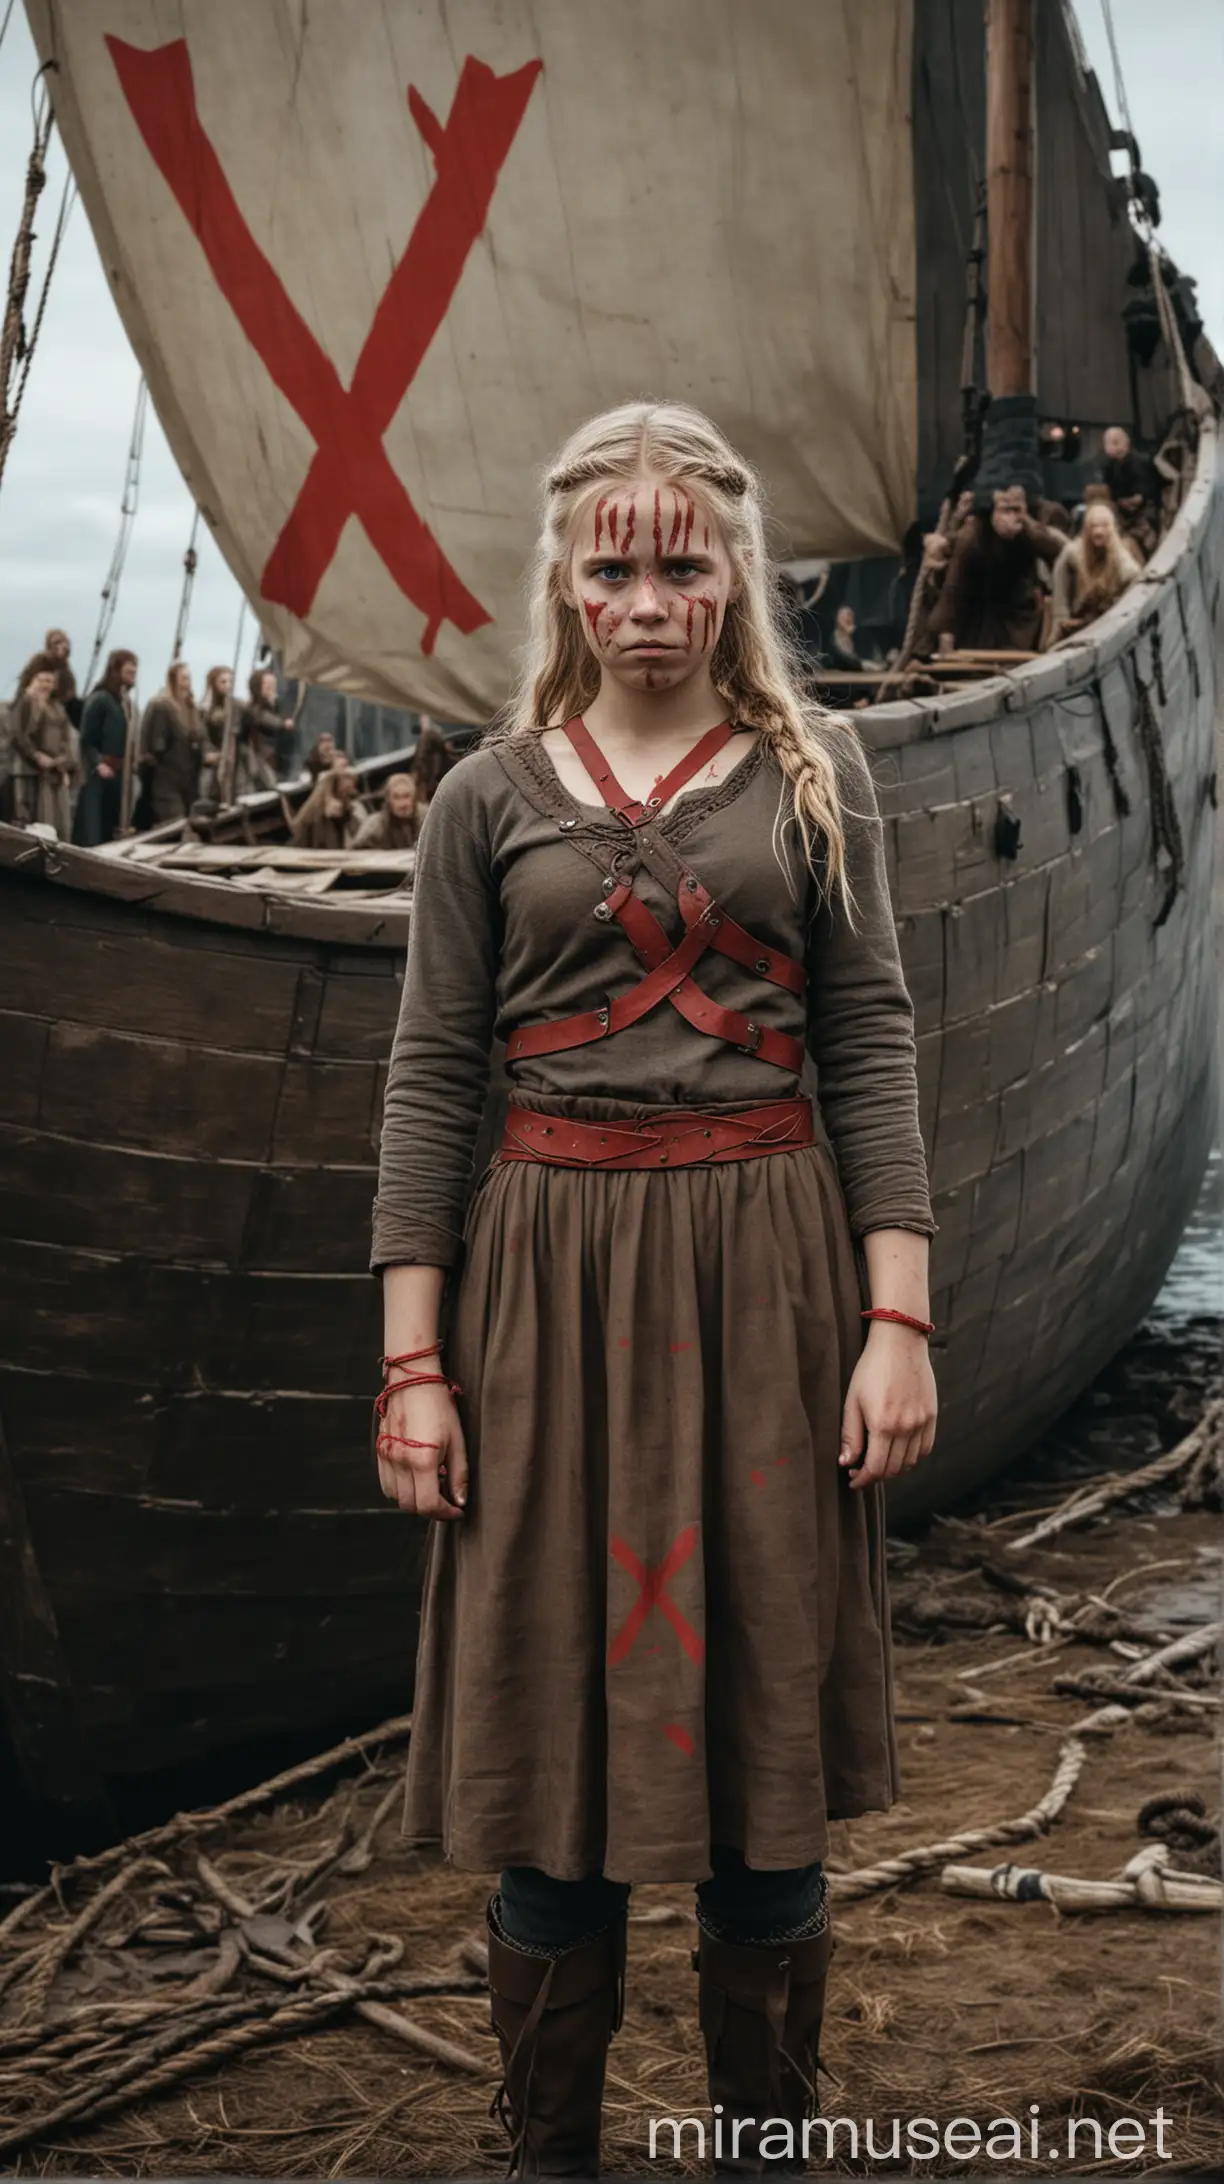 A Viking slave girl standing in front of a Viking ship, with a sad expression and a red "X" marked through it. .hyper realistic